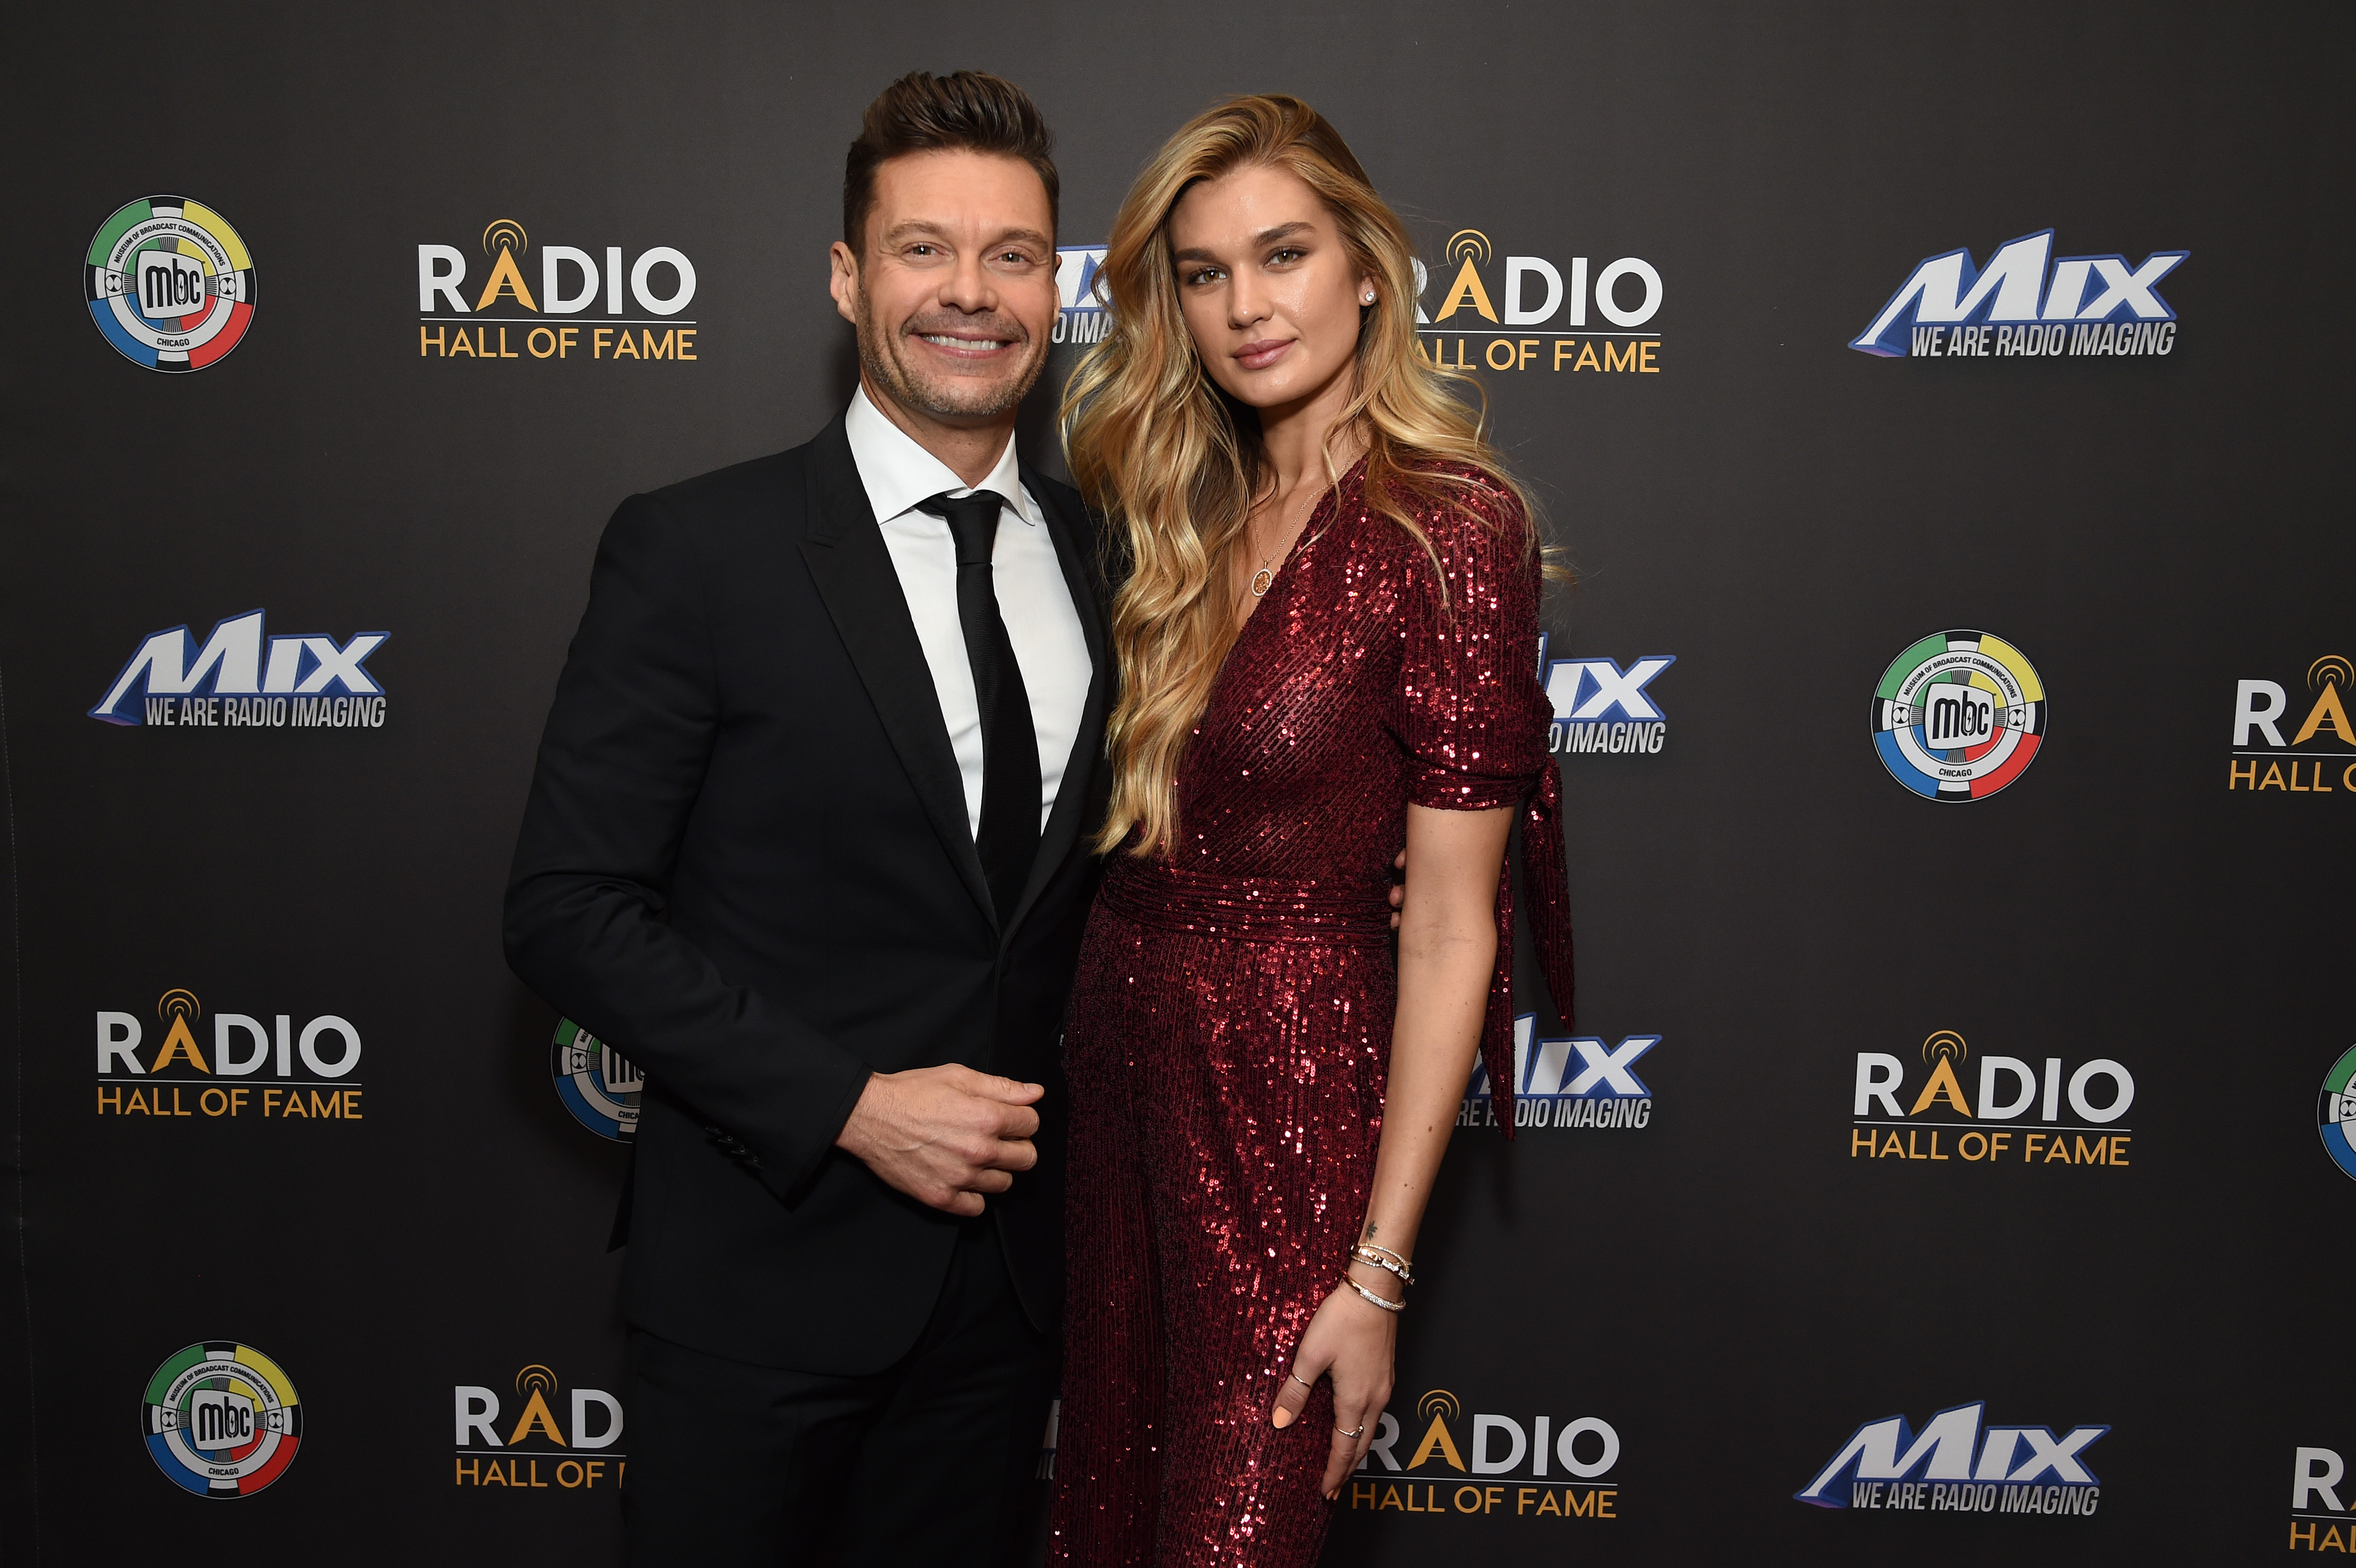 Ryan Seacrest and Shayna Taylor attend the Radio Hall of Fame Class of 2019 Induction Ceremony at Gotham Hall on November 8, 2019, in New York City. | Source: Getty Images